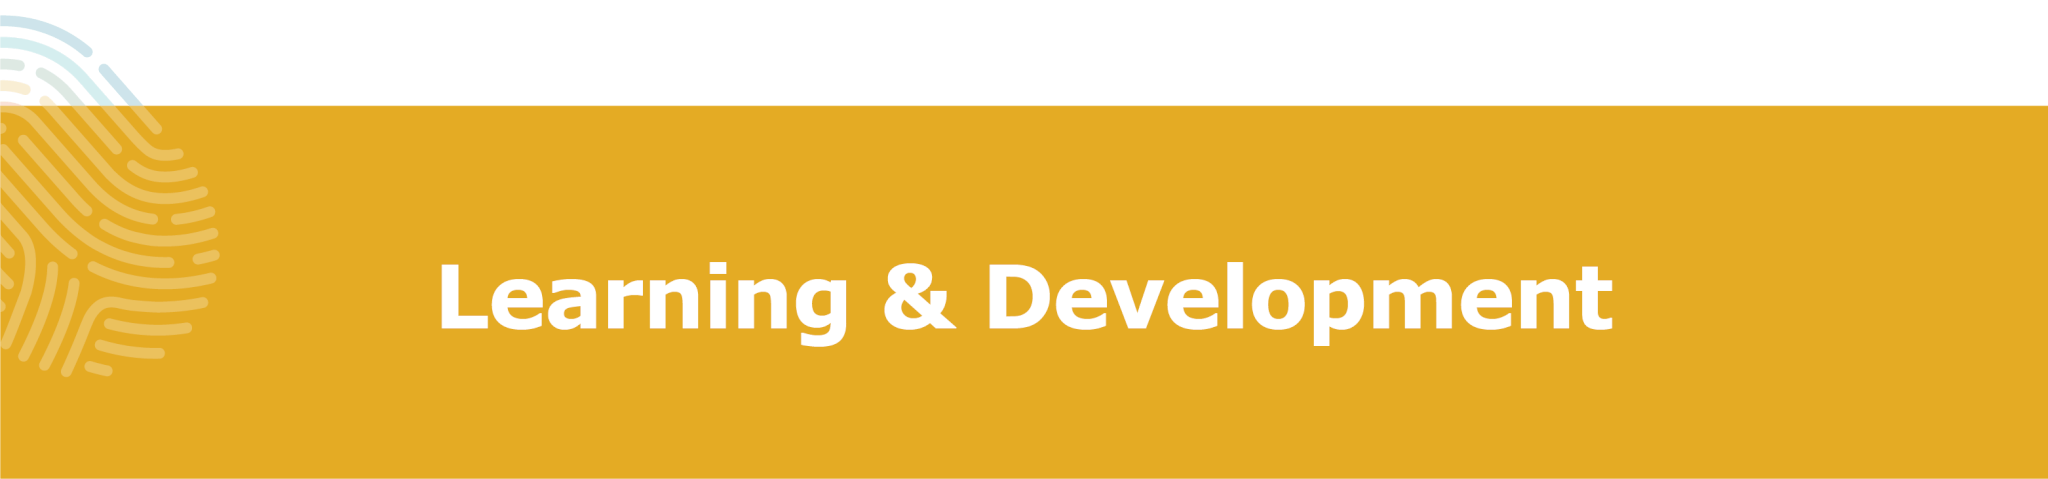 Learning and Development Header Graphic